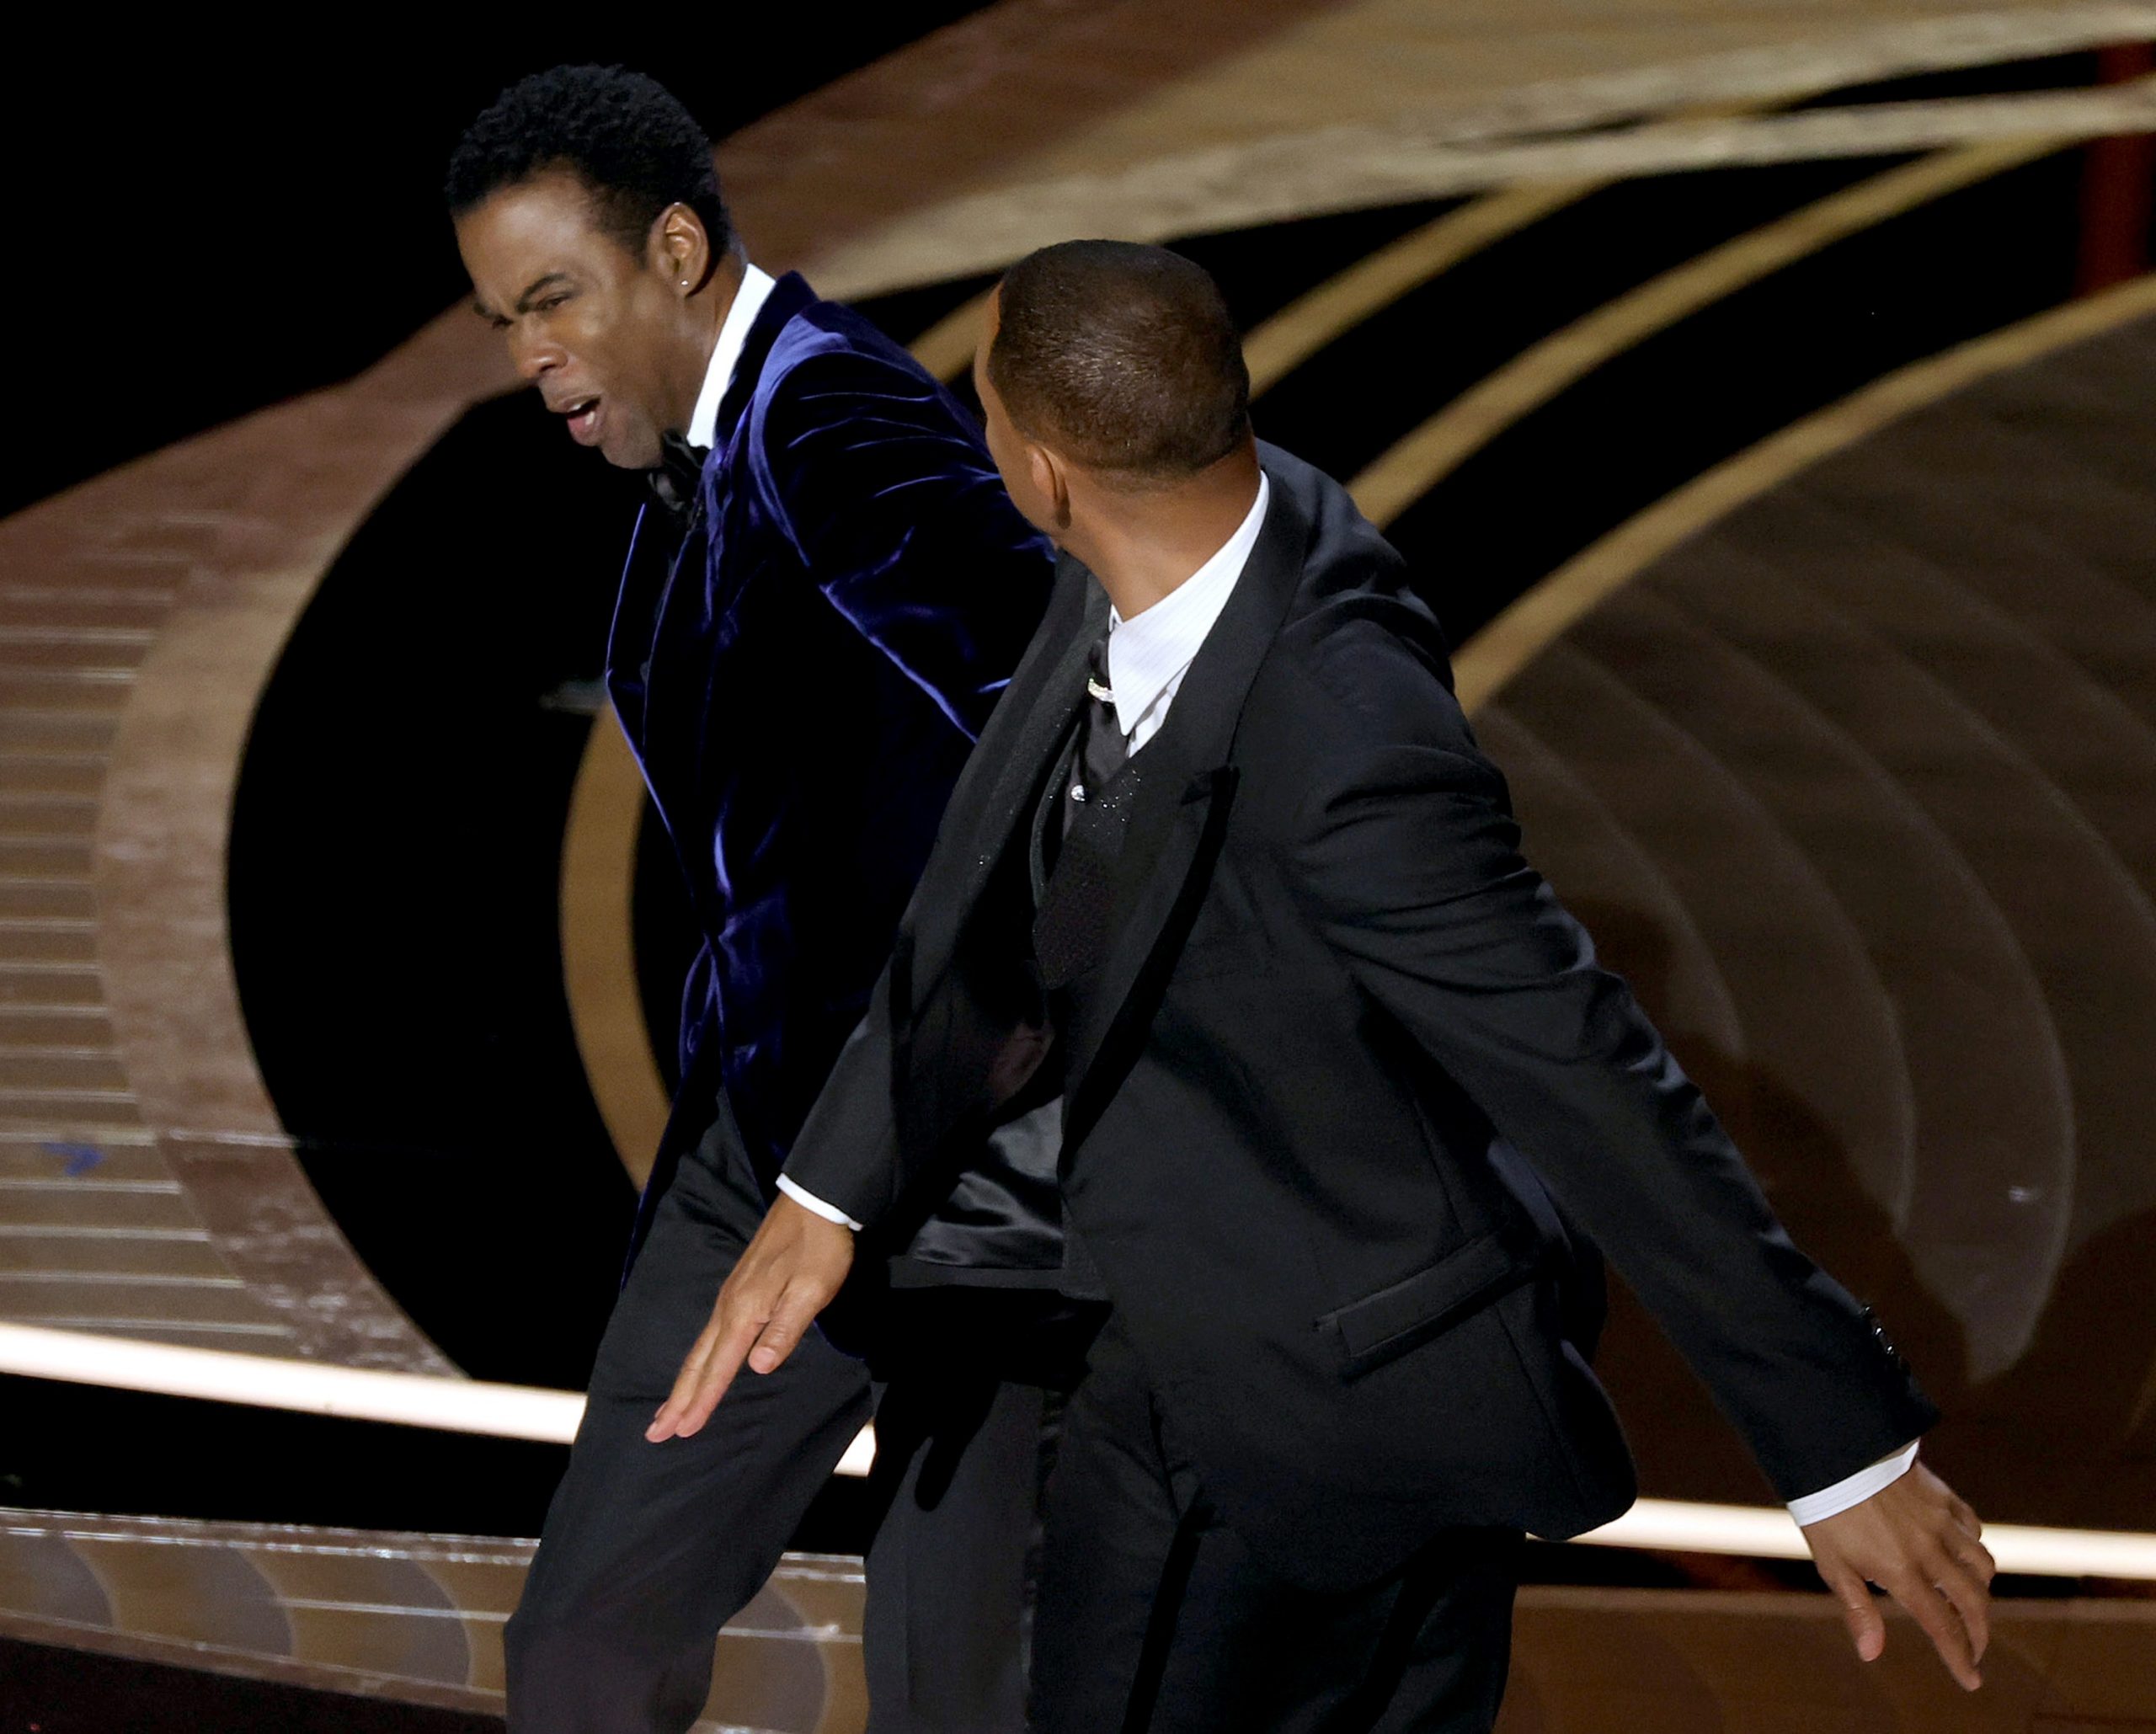 ‘Oscars 2022’: Will Smith and Chris Rock — Here’s What Happened